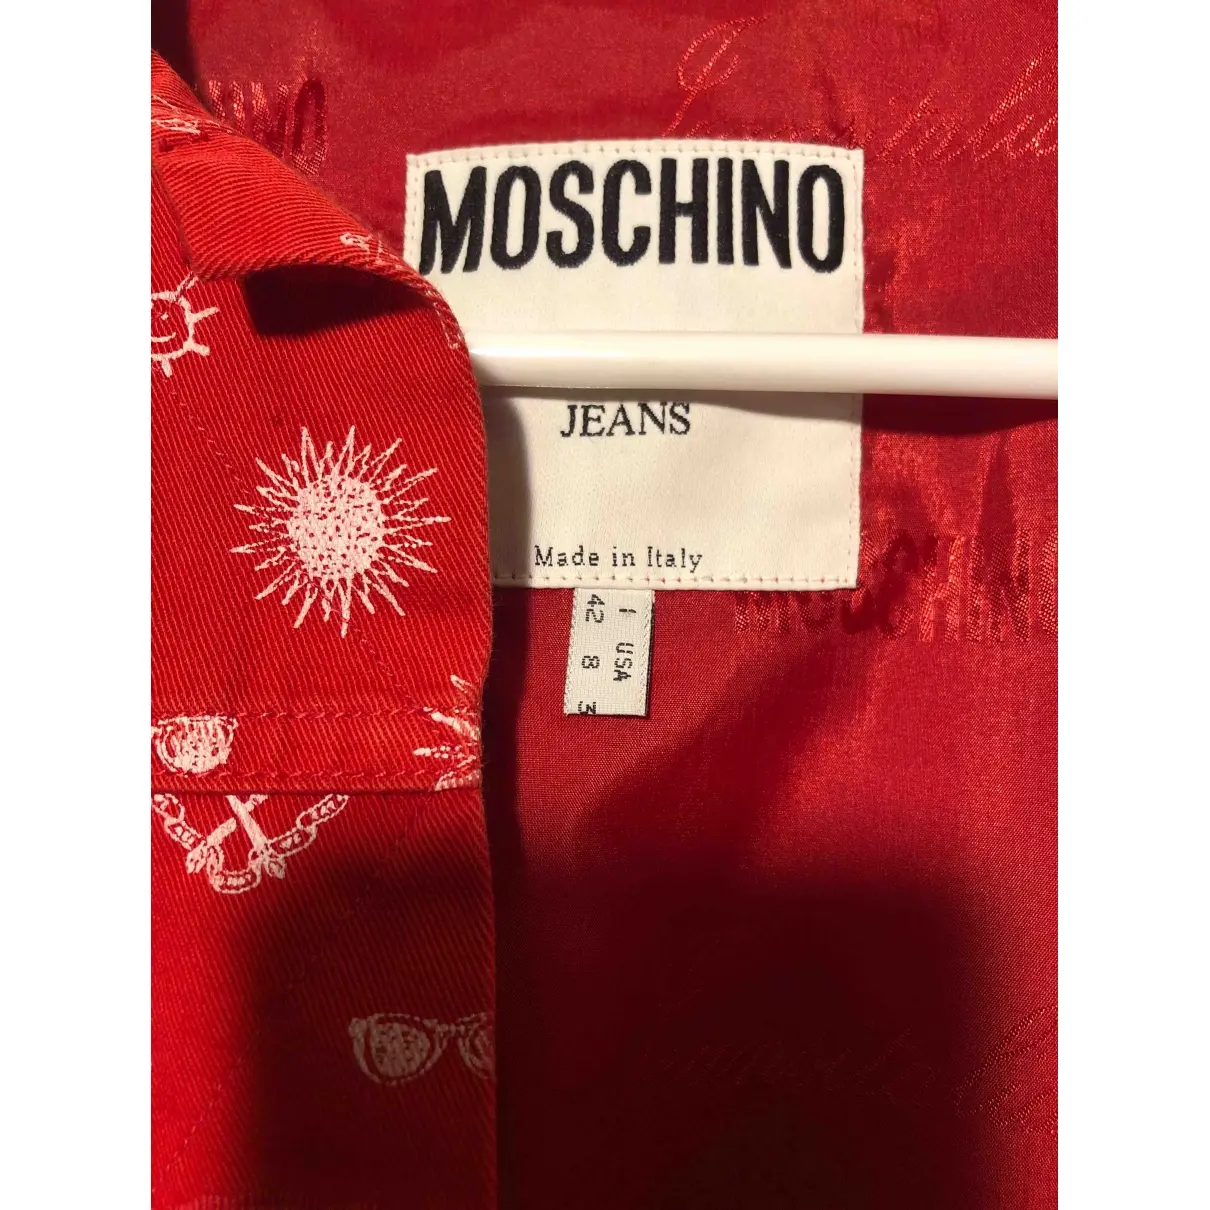 Buy Moschino Cheap And Chic Jacket online